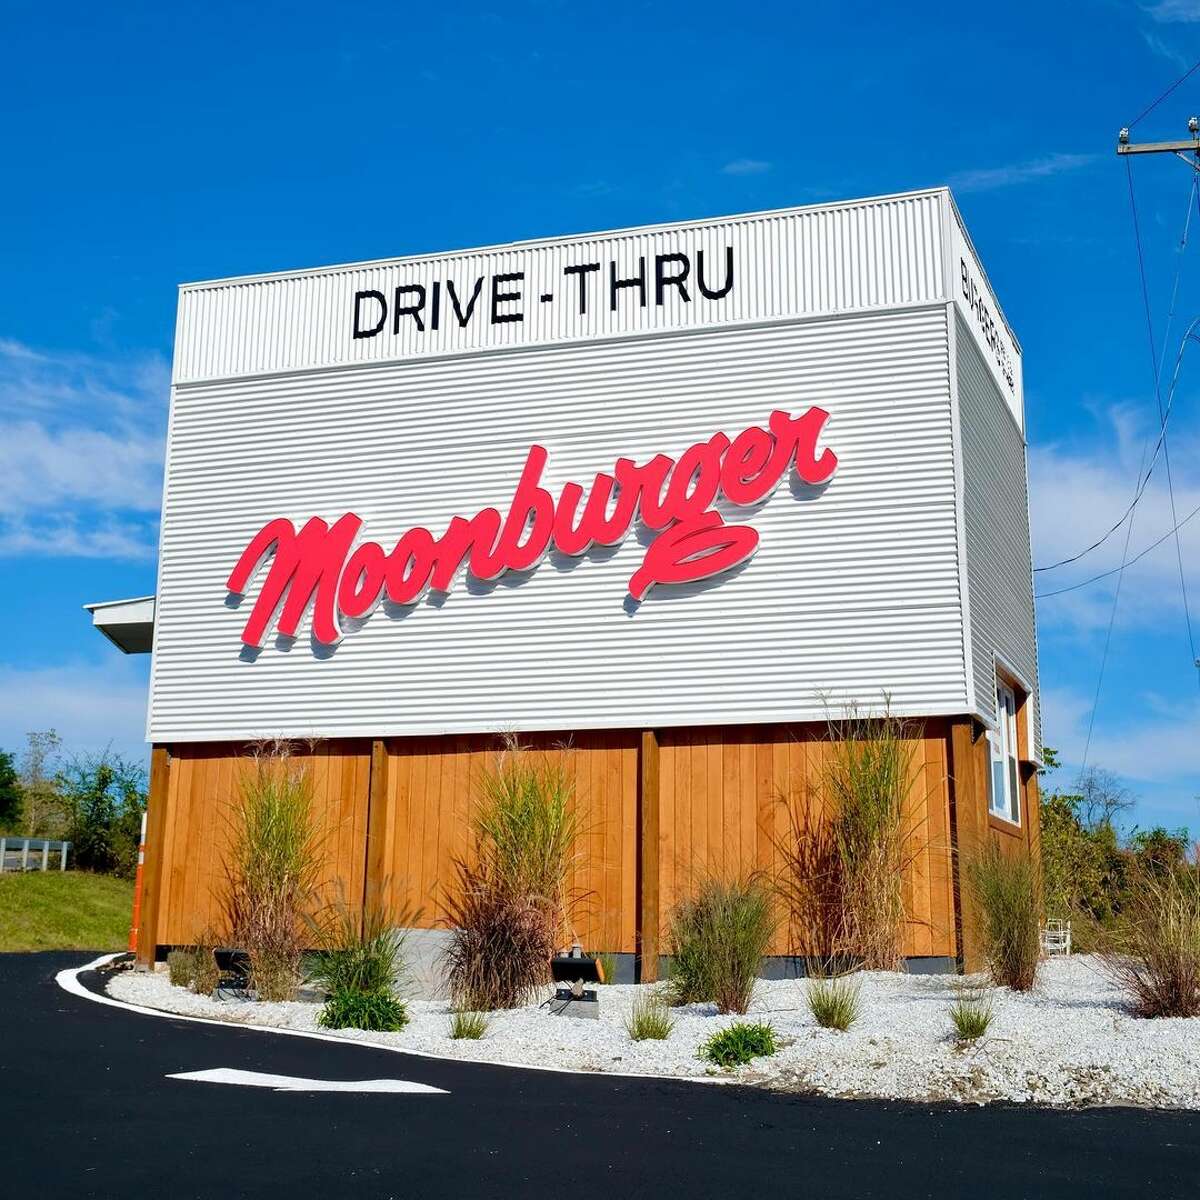 Kingston's futuristic-looking drive-thru burger joint has the future in mind: all burgers are plant-based, and shakes are made with oat milk. The popular restaurant plans to open a second location in New Paltz next year.